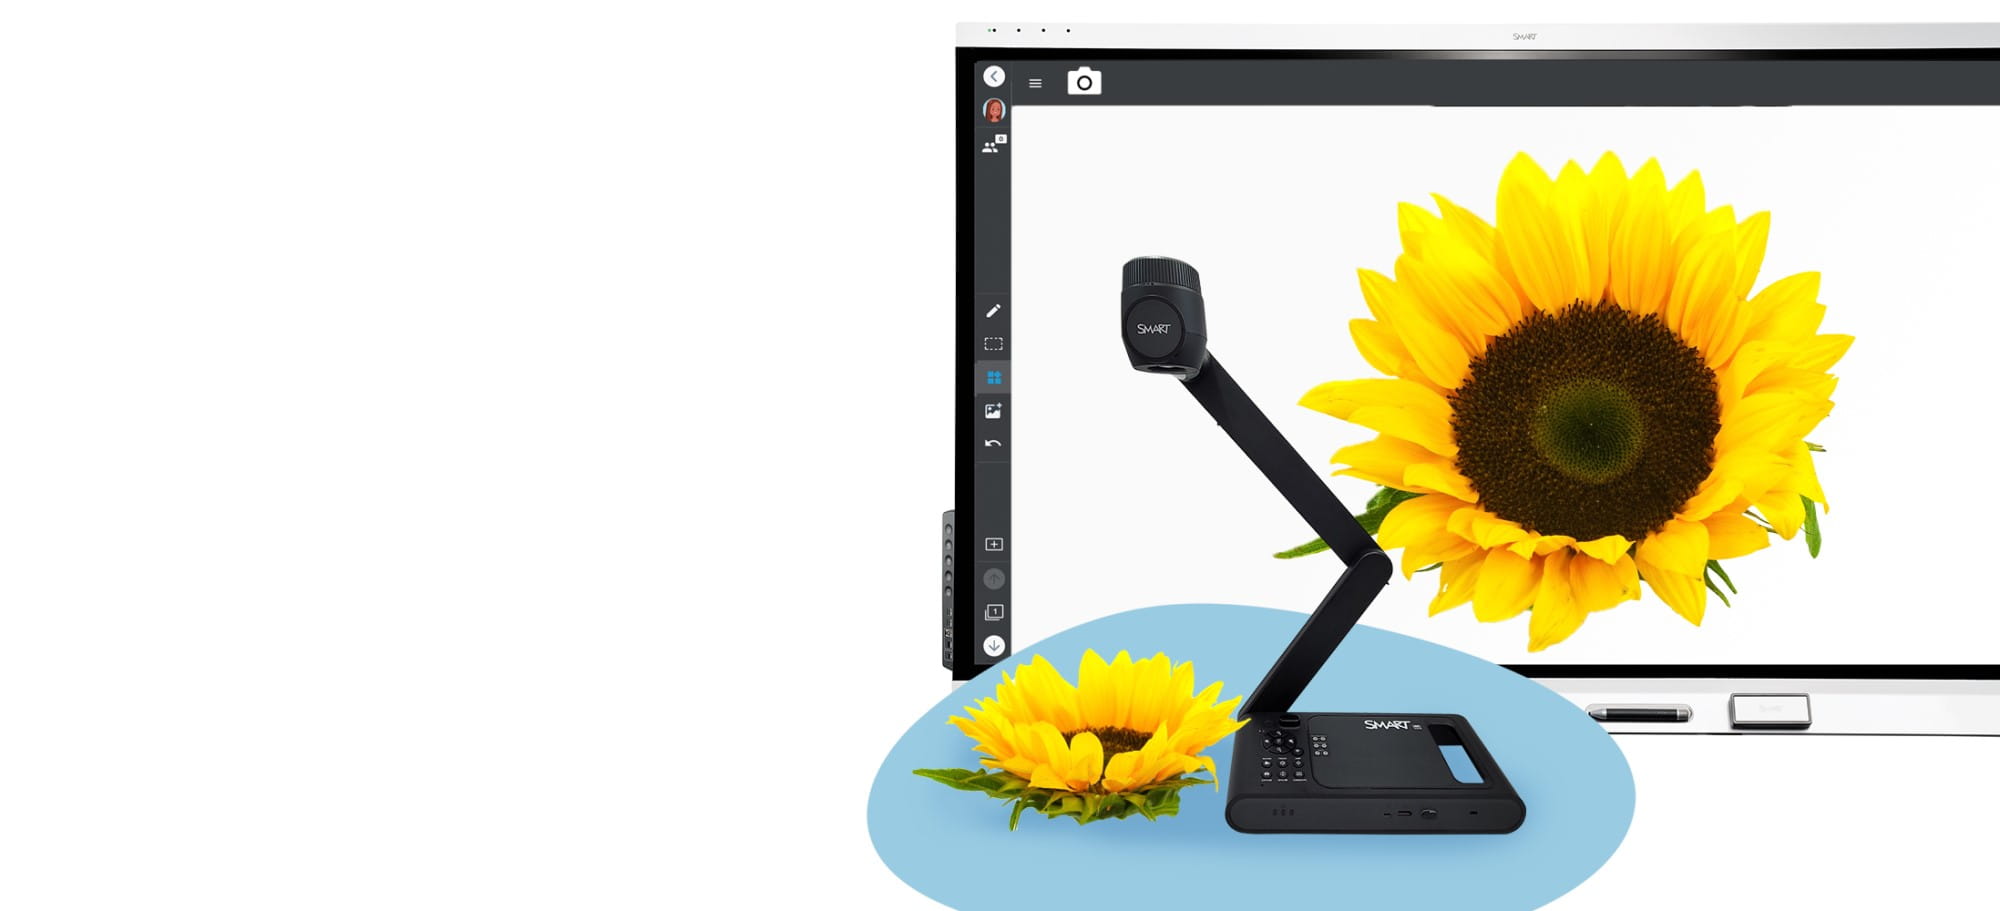 What Is a Document Camera: 8 Things to Consider Before Buying